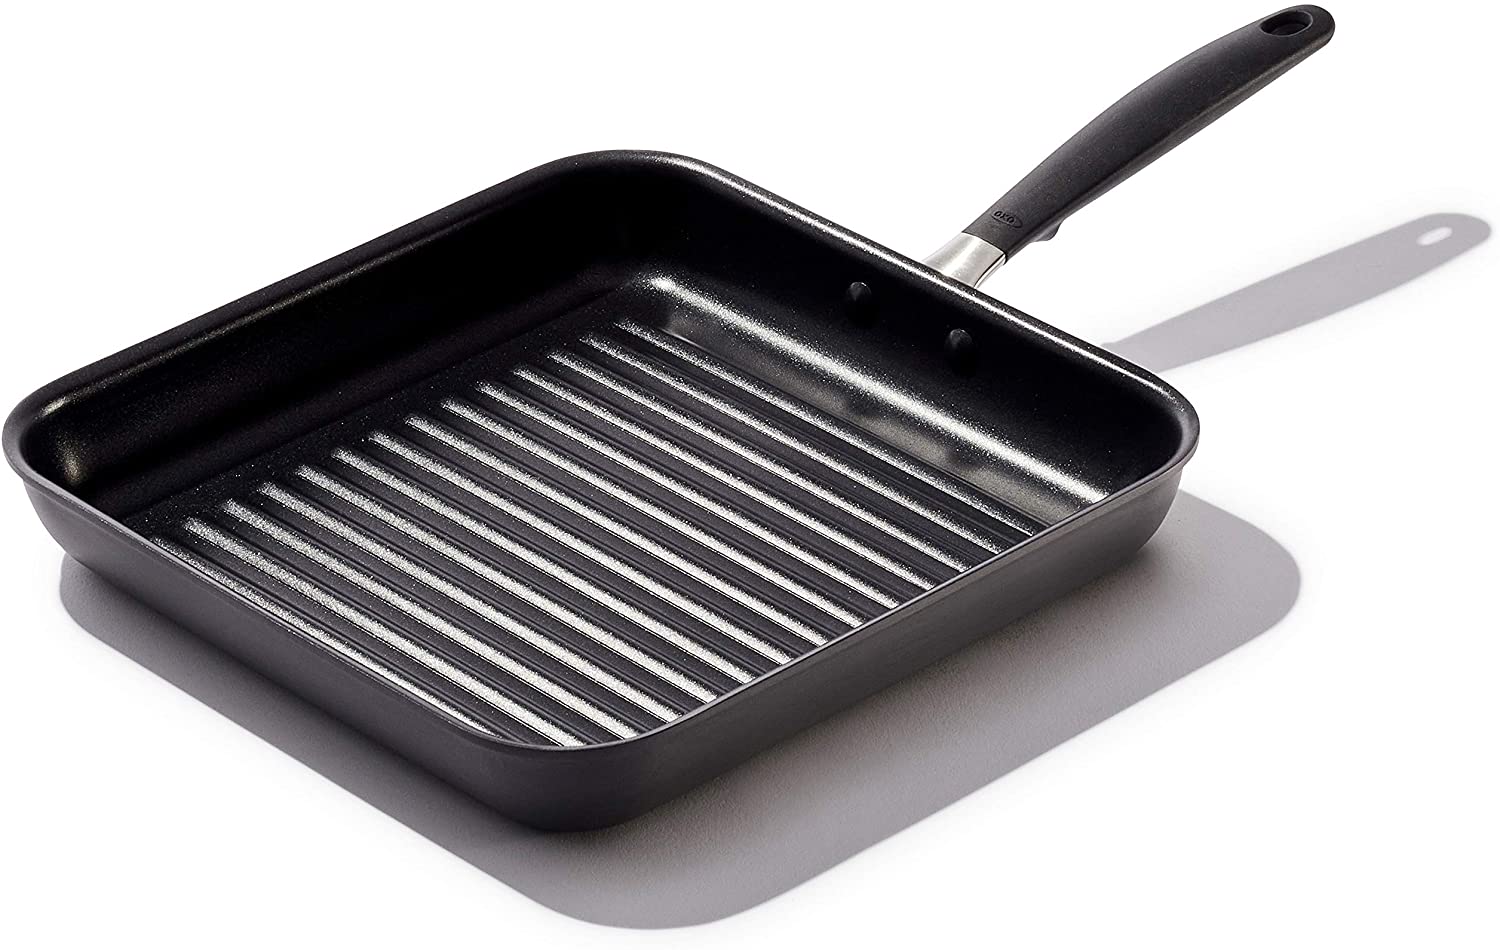 OXO Good Grips Anodized Nonstick Grill Pan, 11-Inch